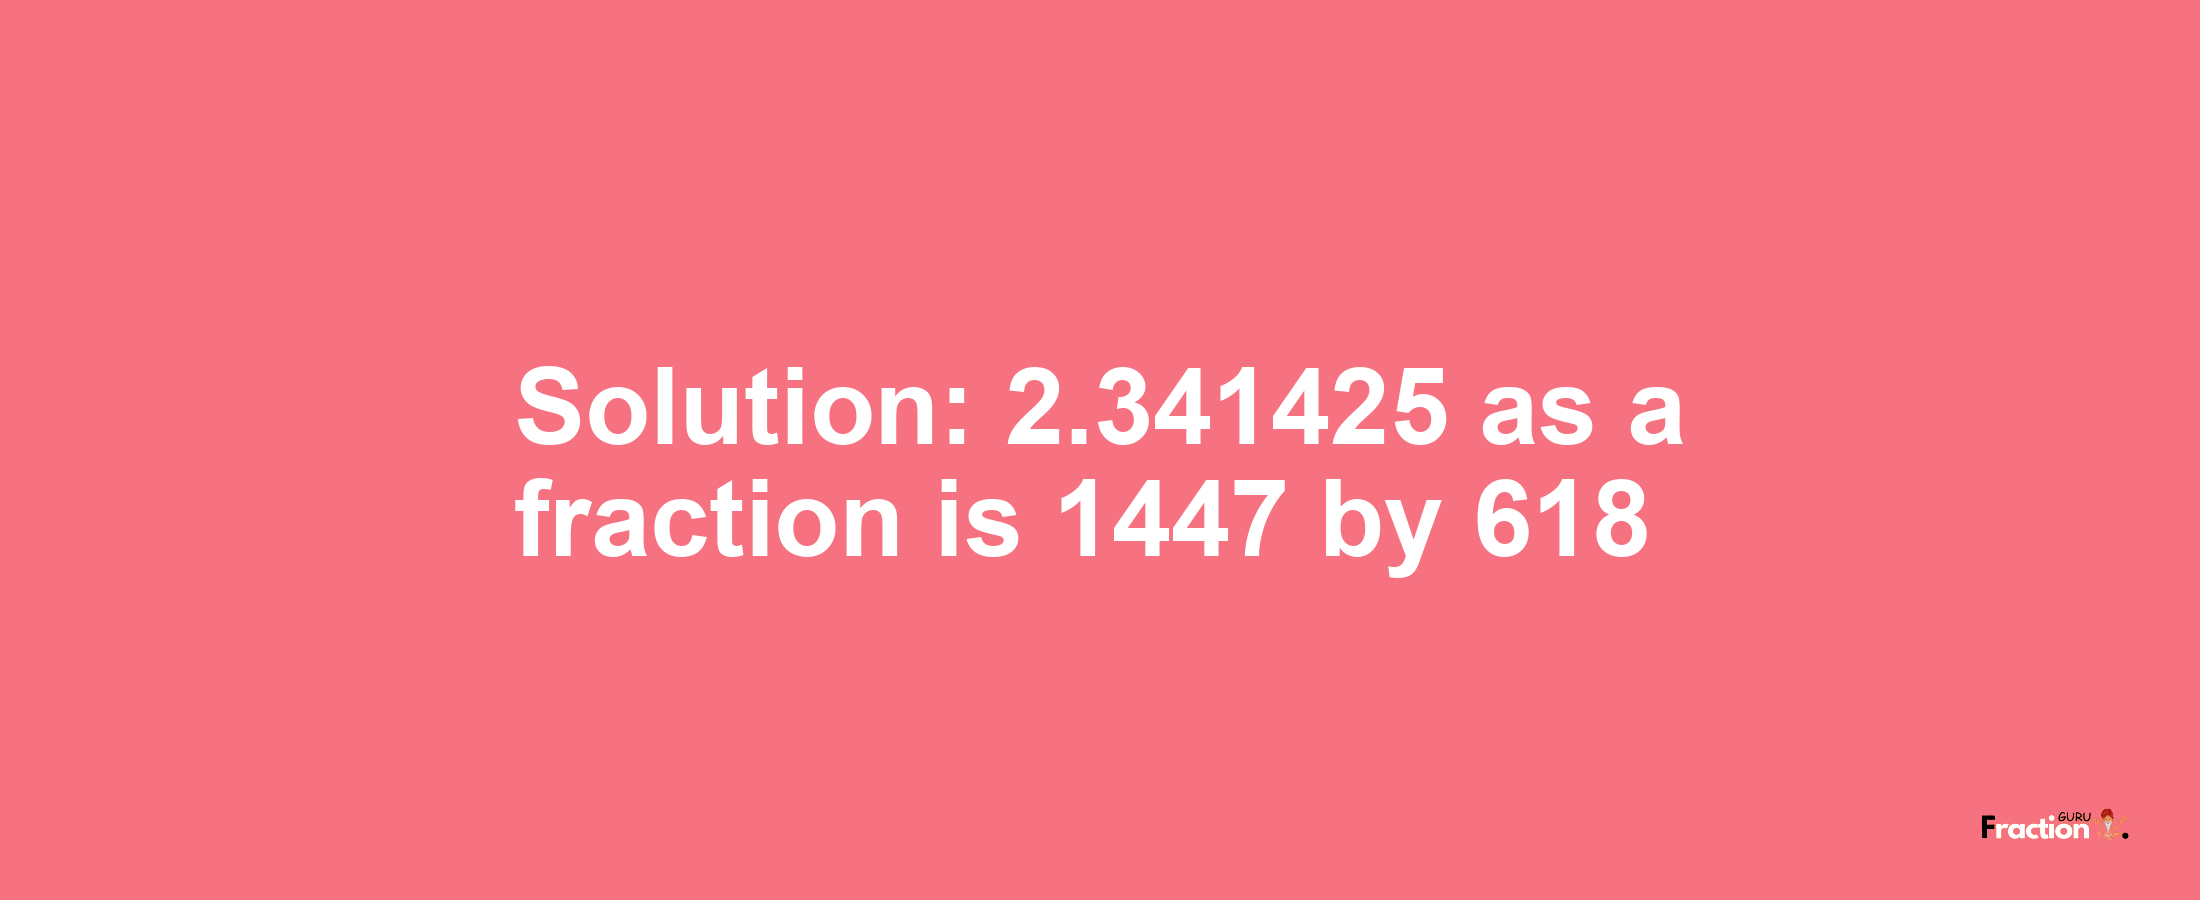 Solution:2.341425 as a fraction is 1447/618